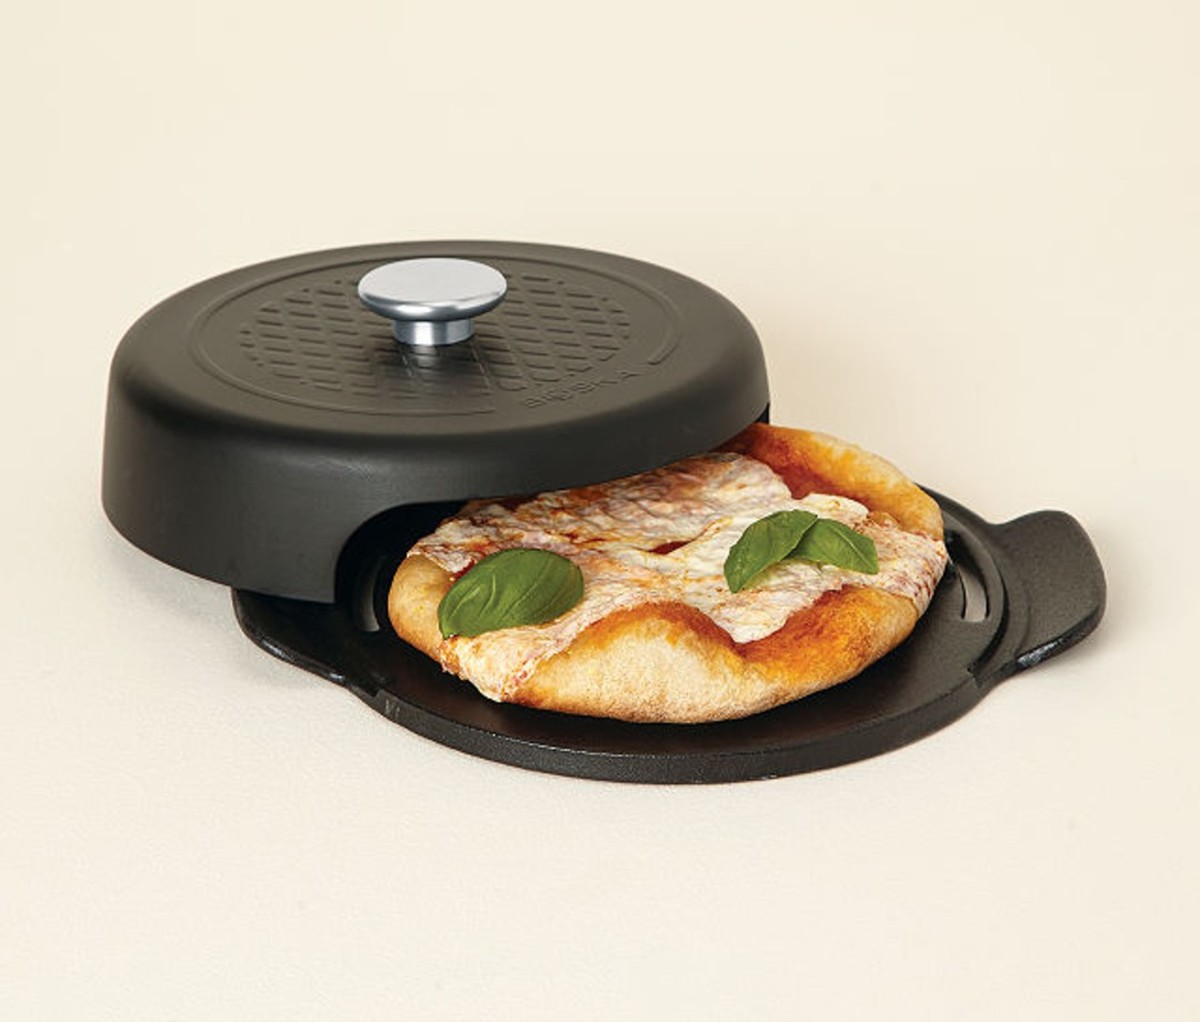 Grilled Personal Pizza Maker